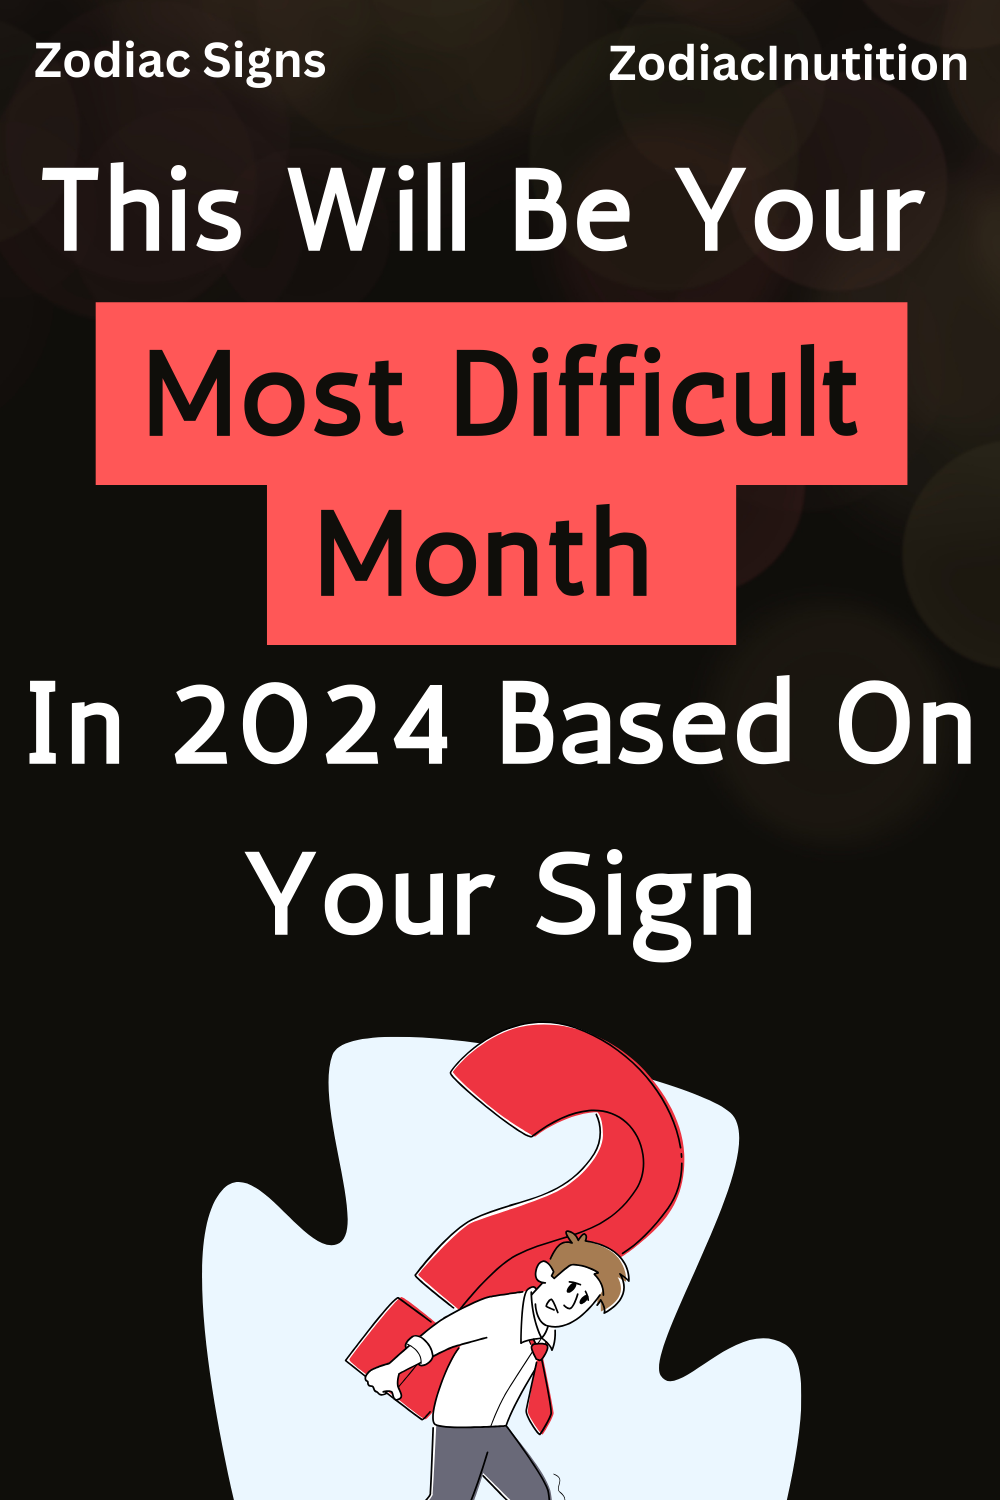 This Will Be Your Most Difficult Month In 2024 Based On Your Sign